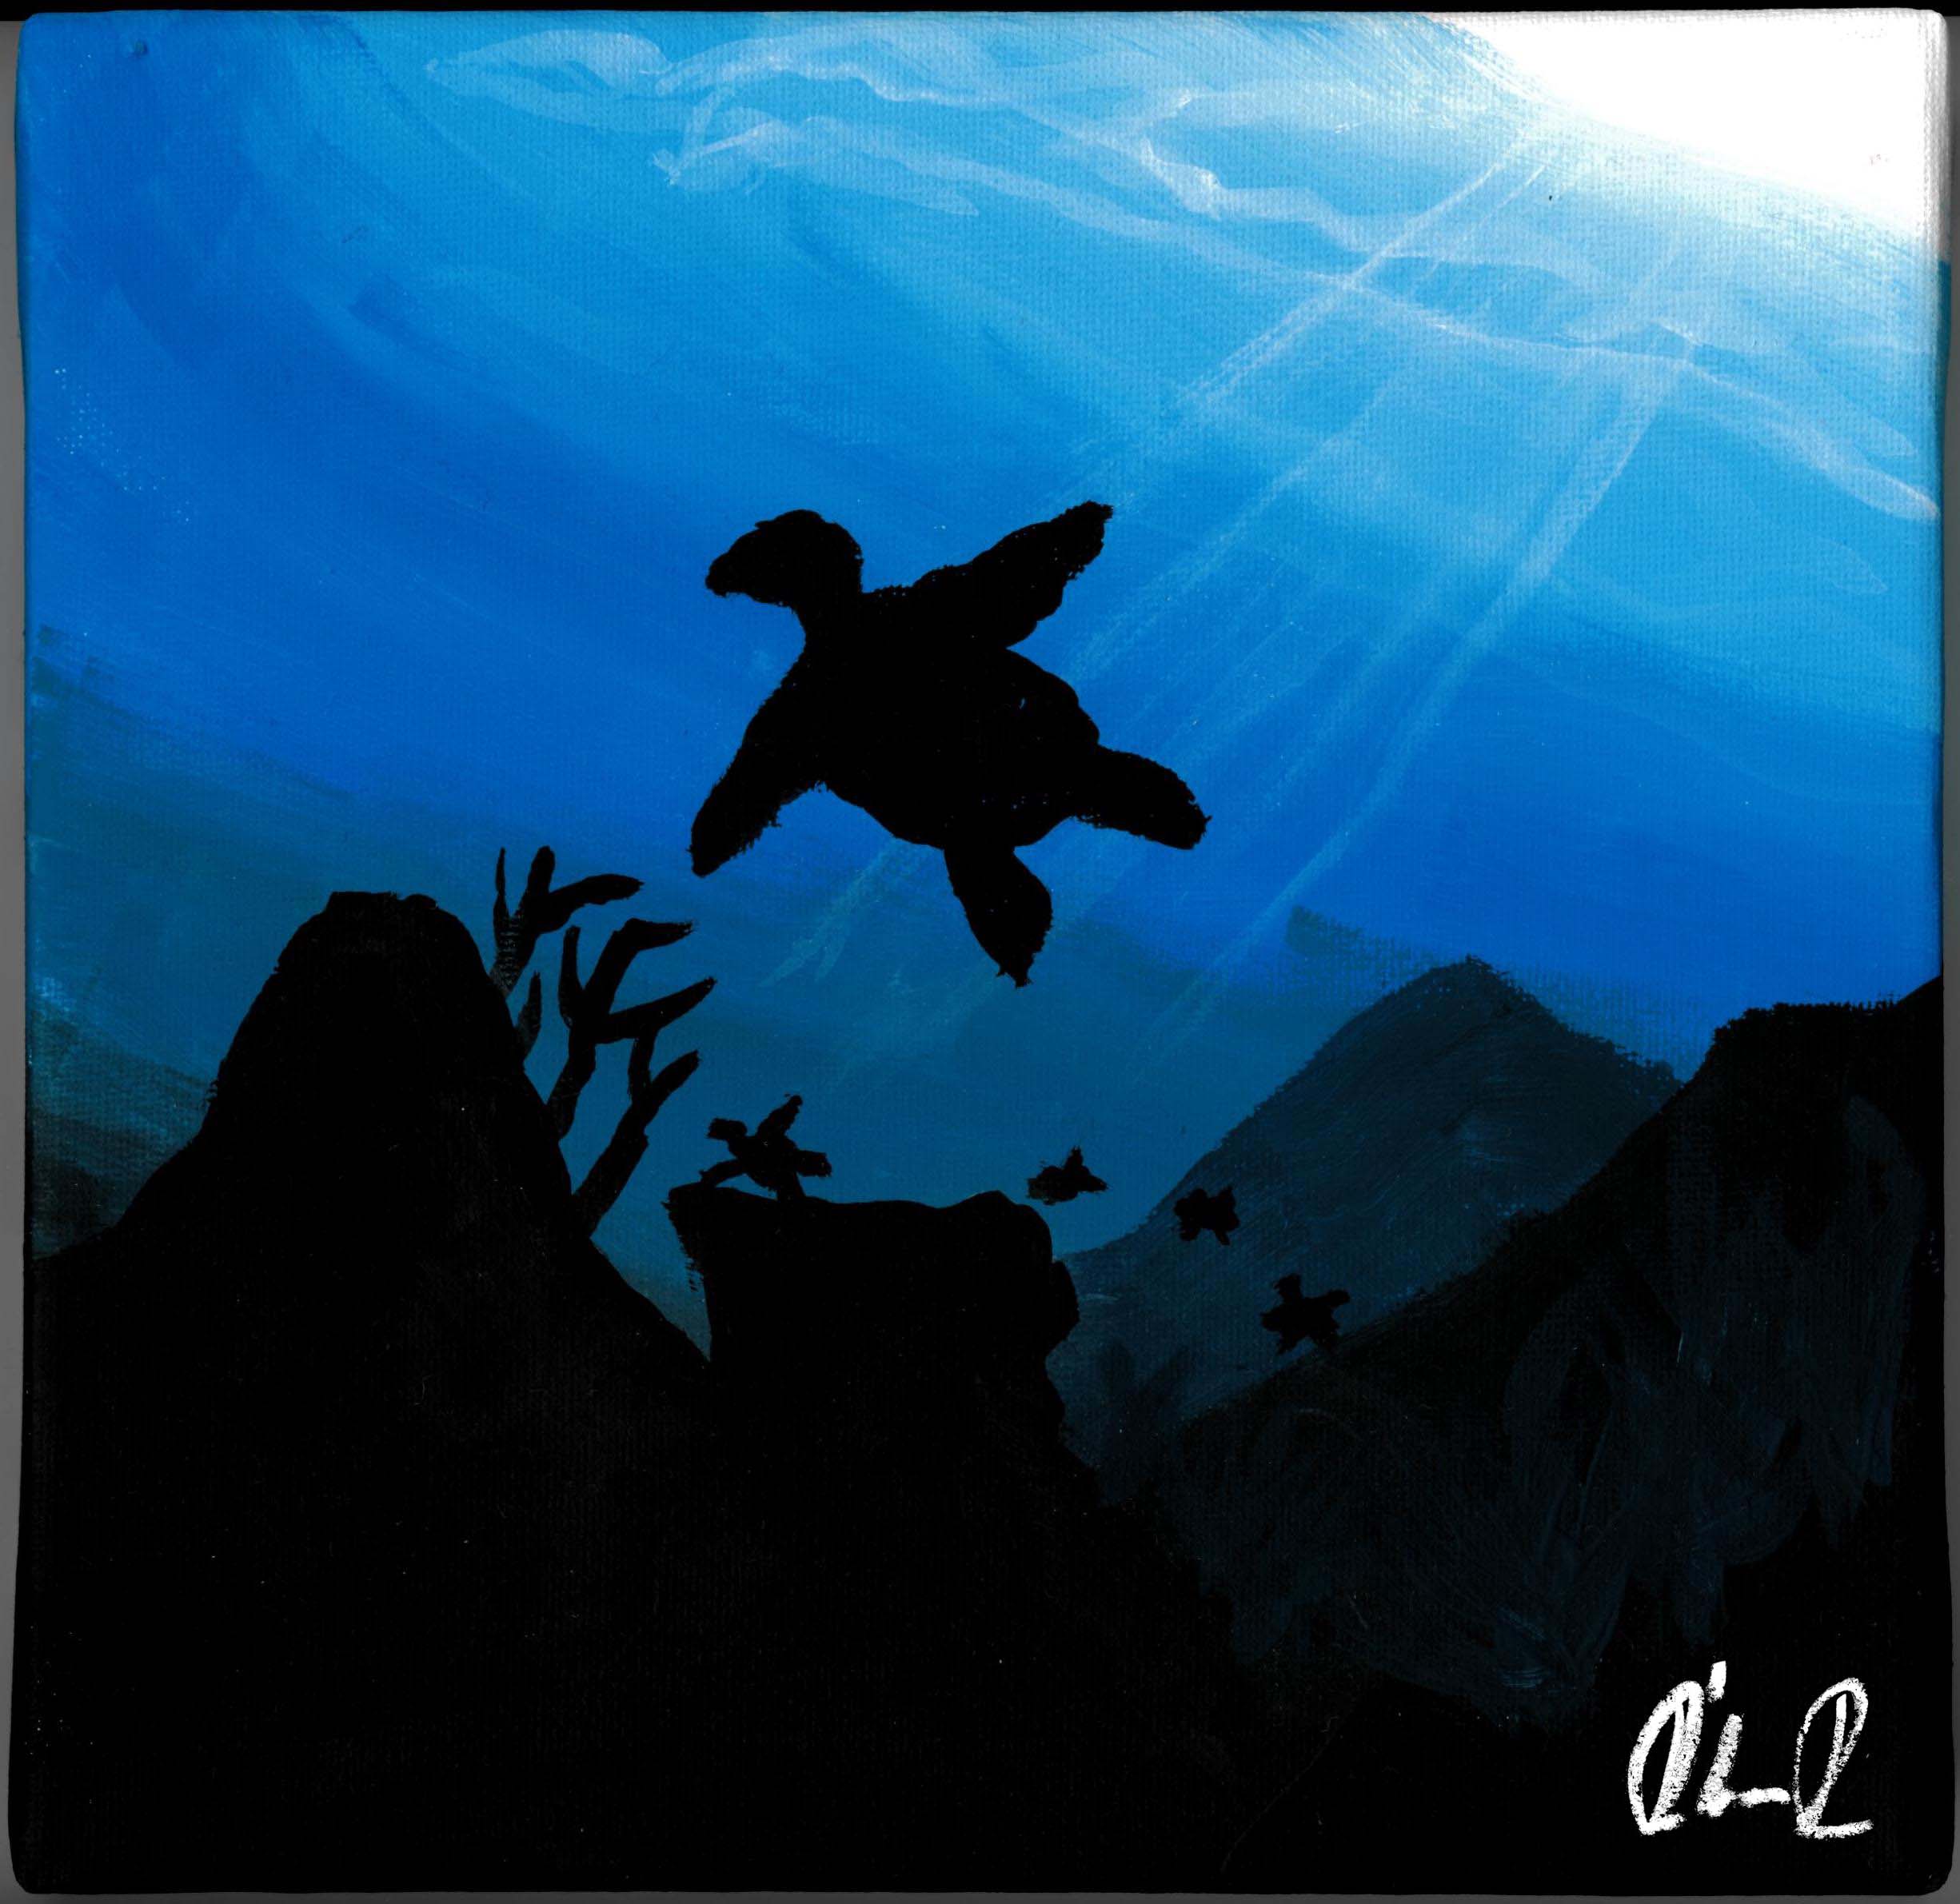 The turtle family underwater still life painting